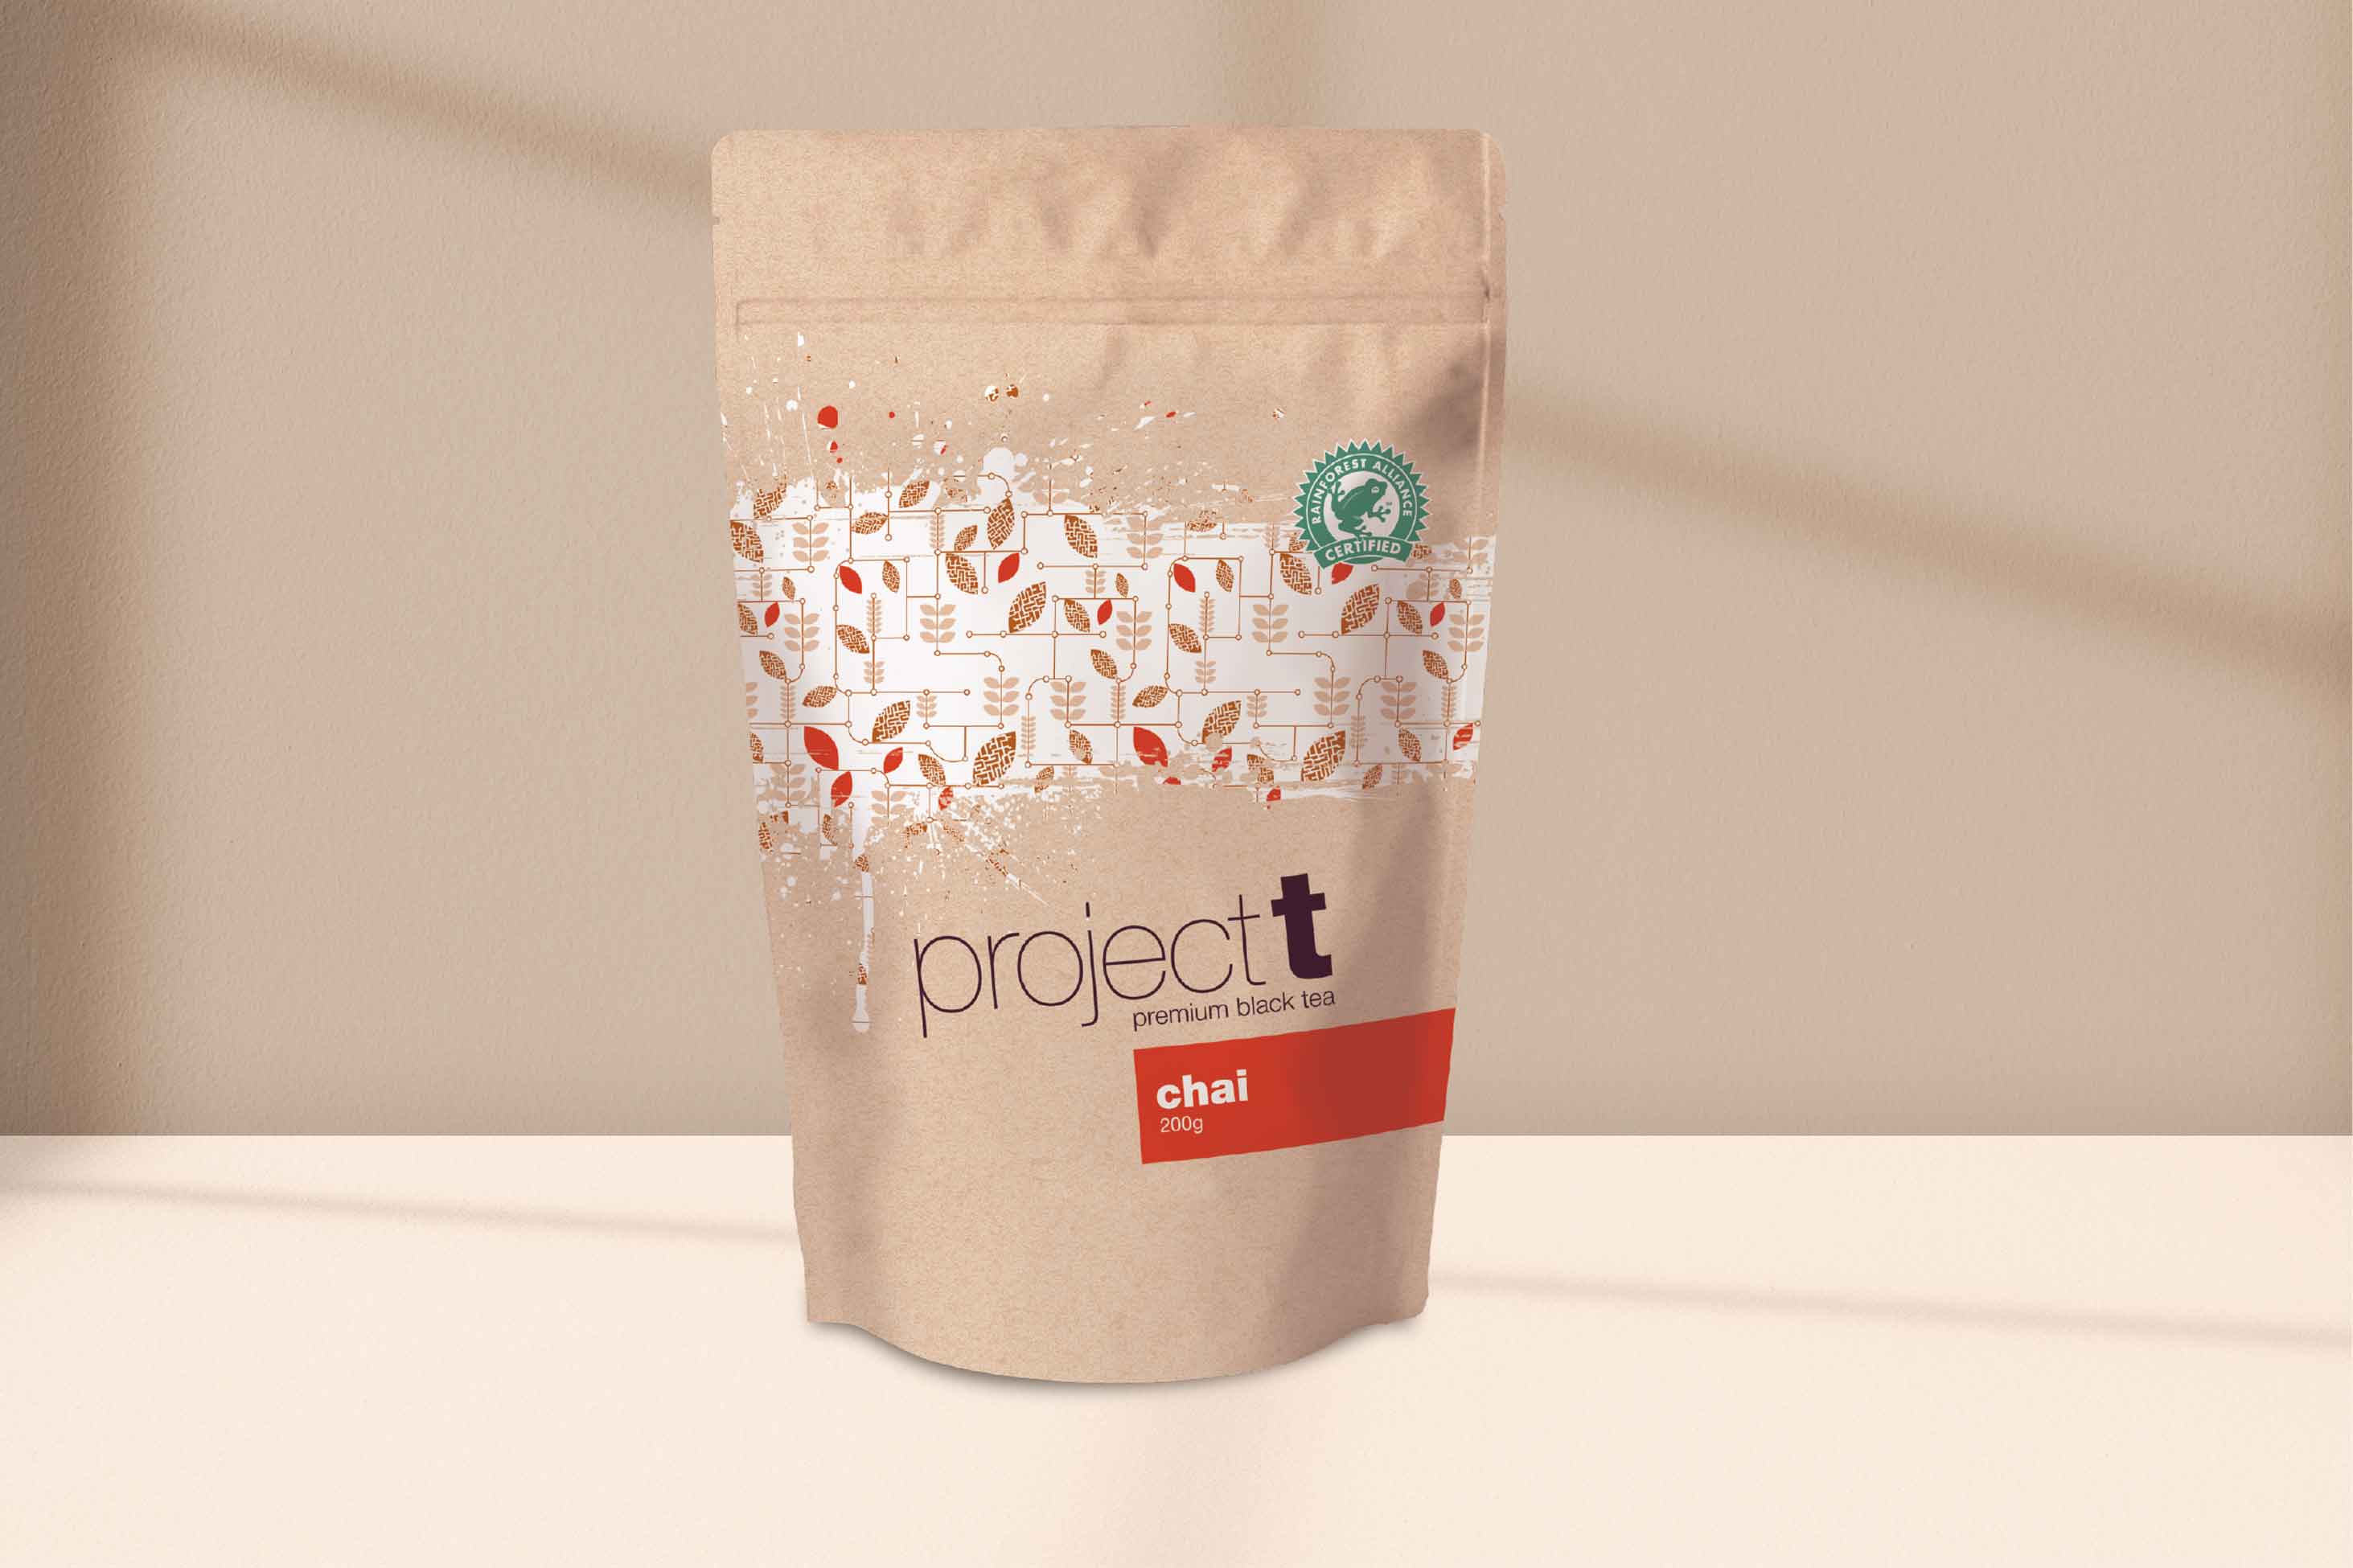 Project T made from high-end Pekoe tea traditionally blended for authentic Chai